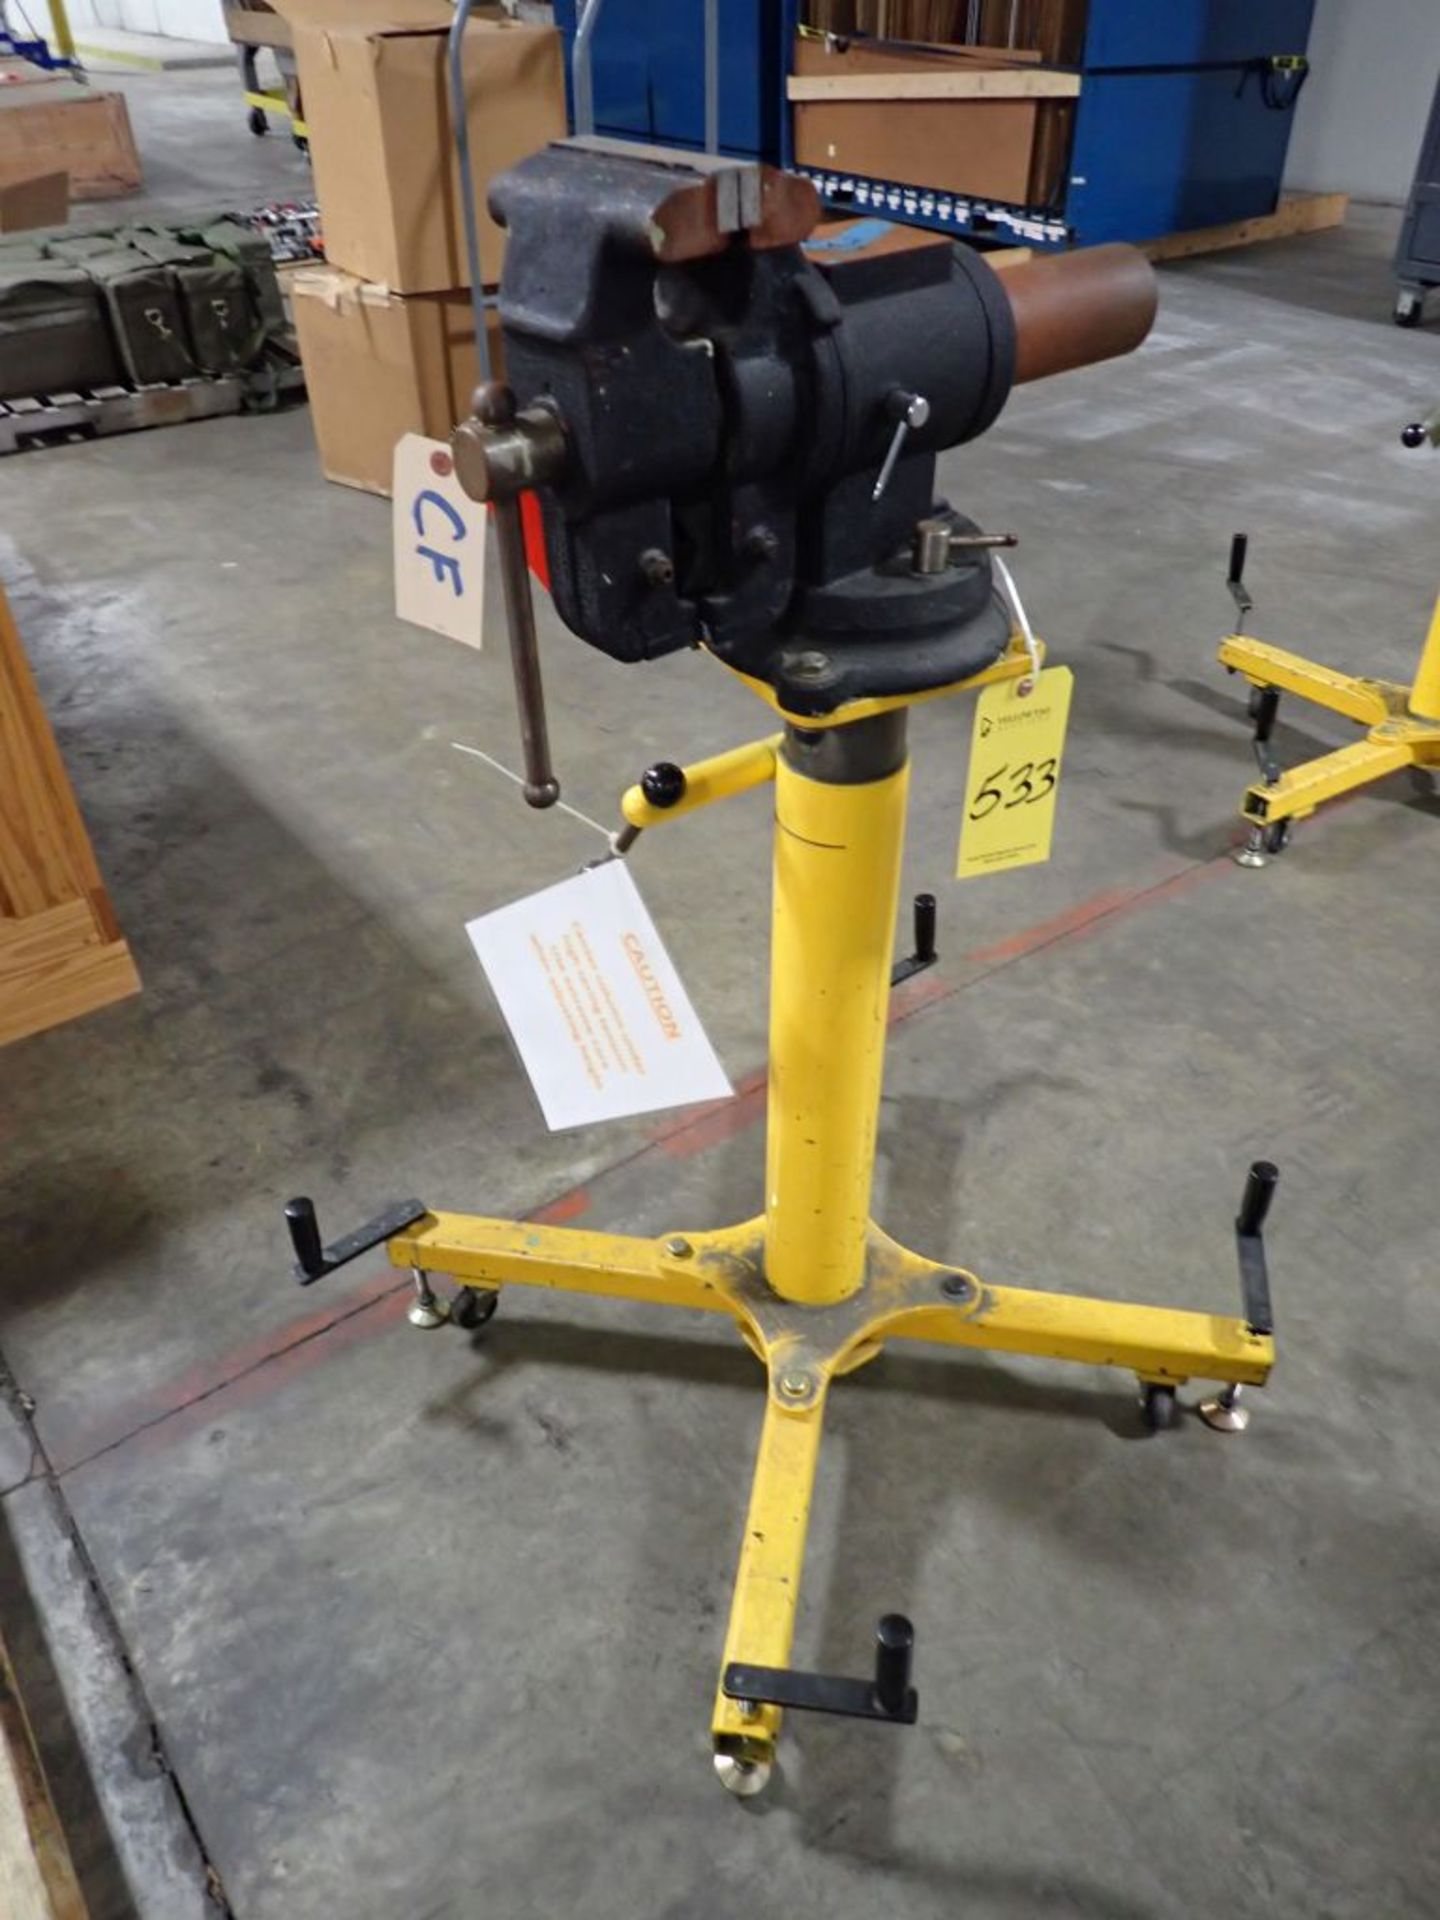 Portable Vise Stand | Tag: 241533 | Limited Forklift Assistance Available - $10.00 Lot Loading Fee